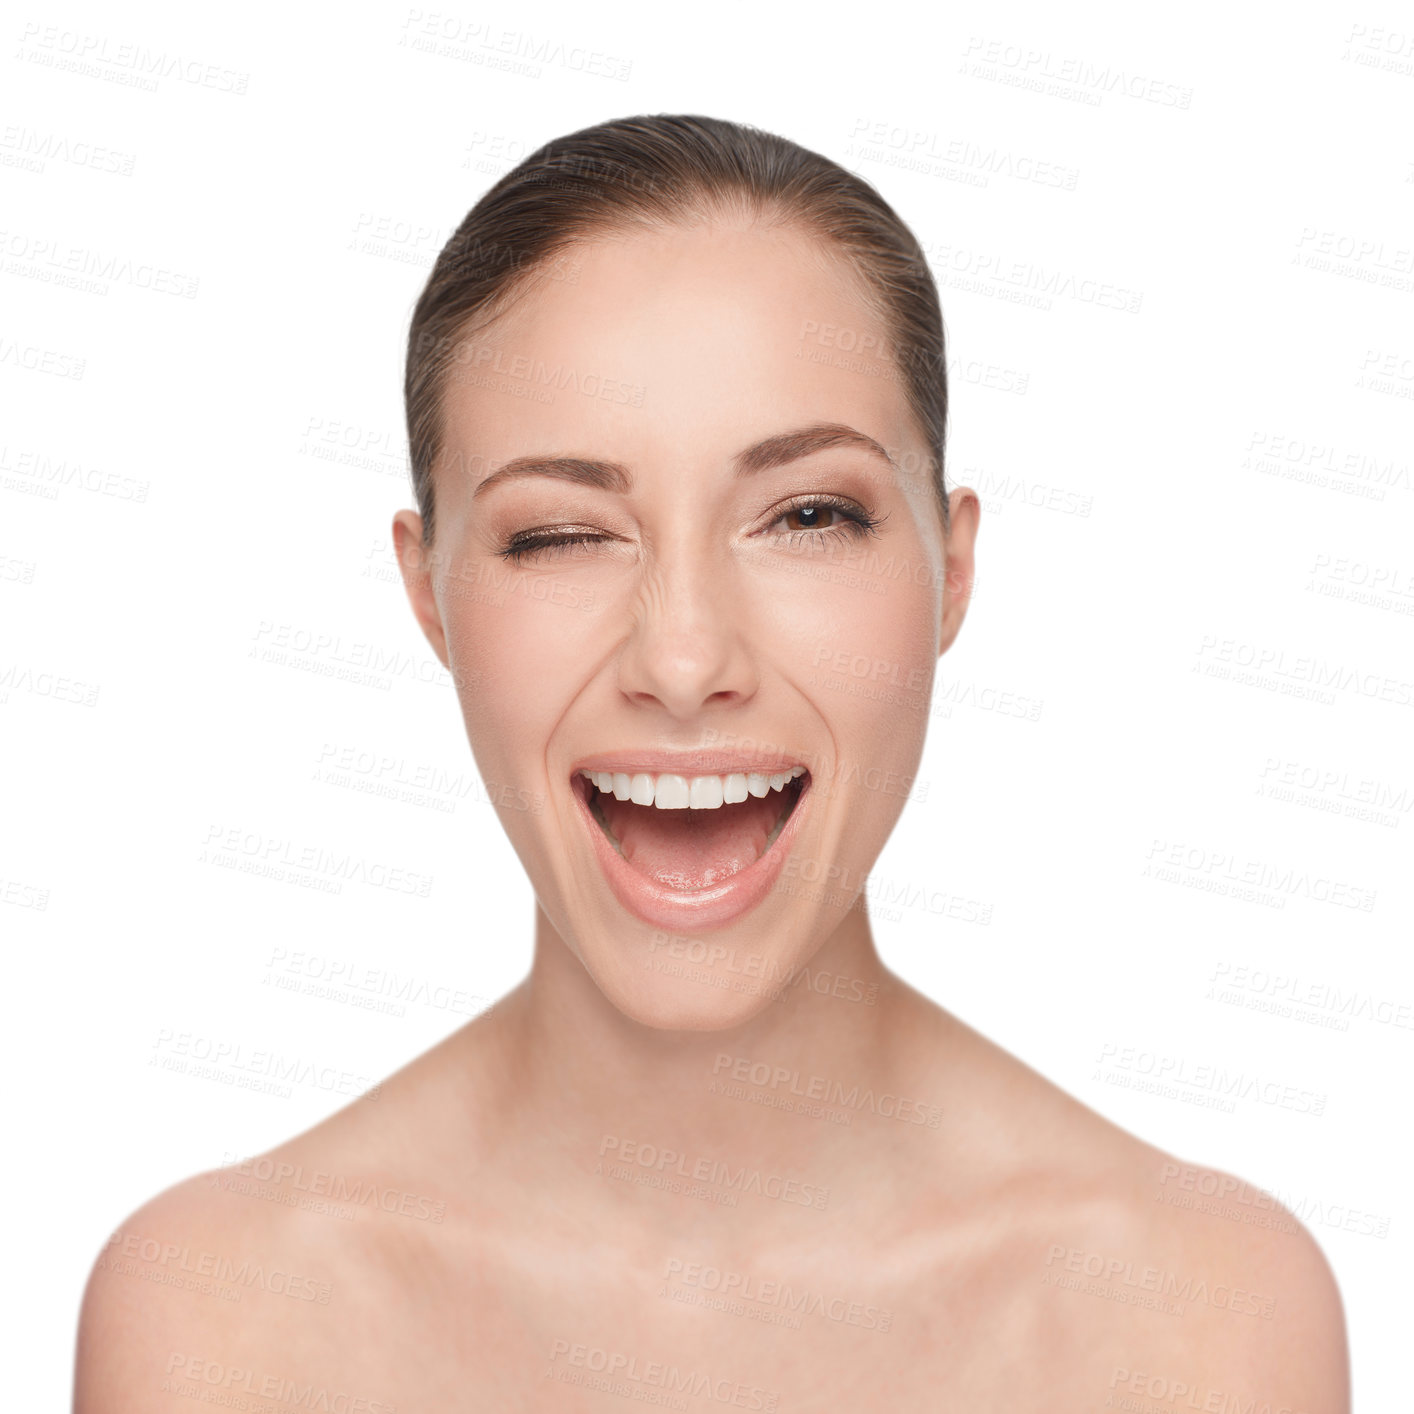 Buy stock photo Portrait, happy and woman wink for skincare, flirt or beauty makeup isolated on white studio background. Face, blink and smile of model in cosmetics excited for spa facial treatment for healthy skin